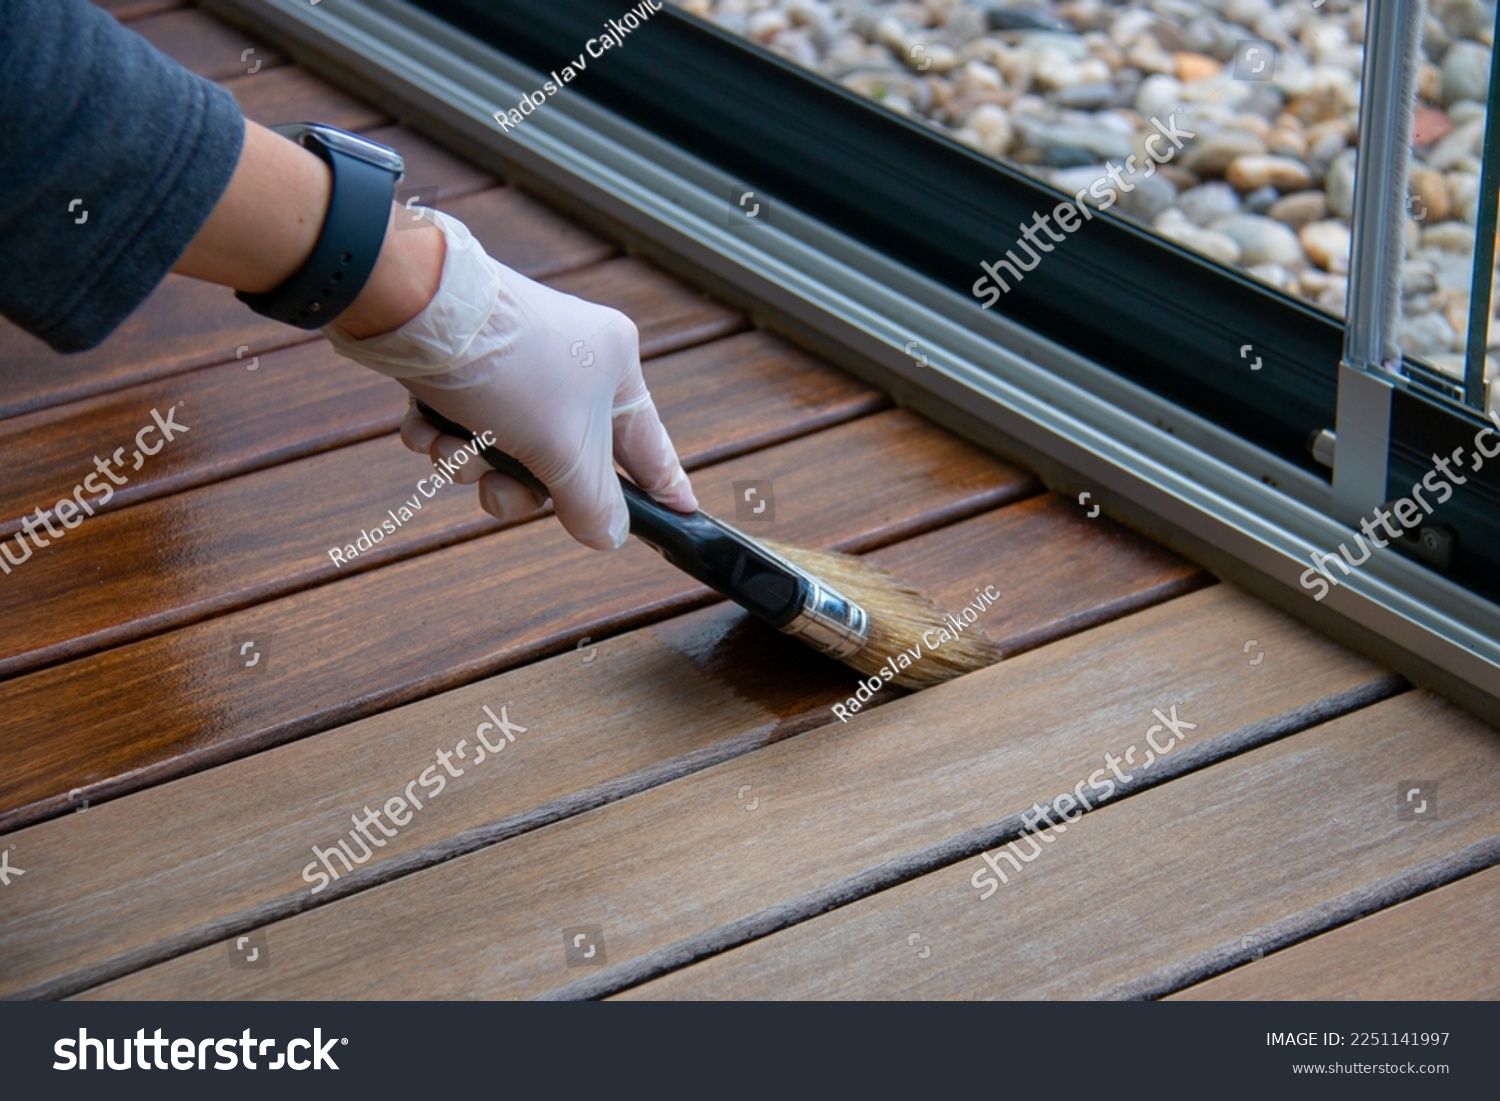 Deck staining, worker applying deck oil on decking boards with paint brush, hardwood terrace renovation #2251141997